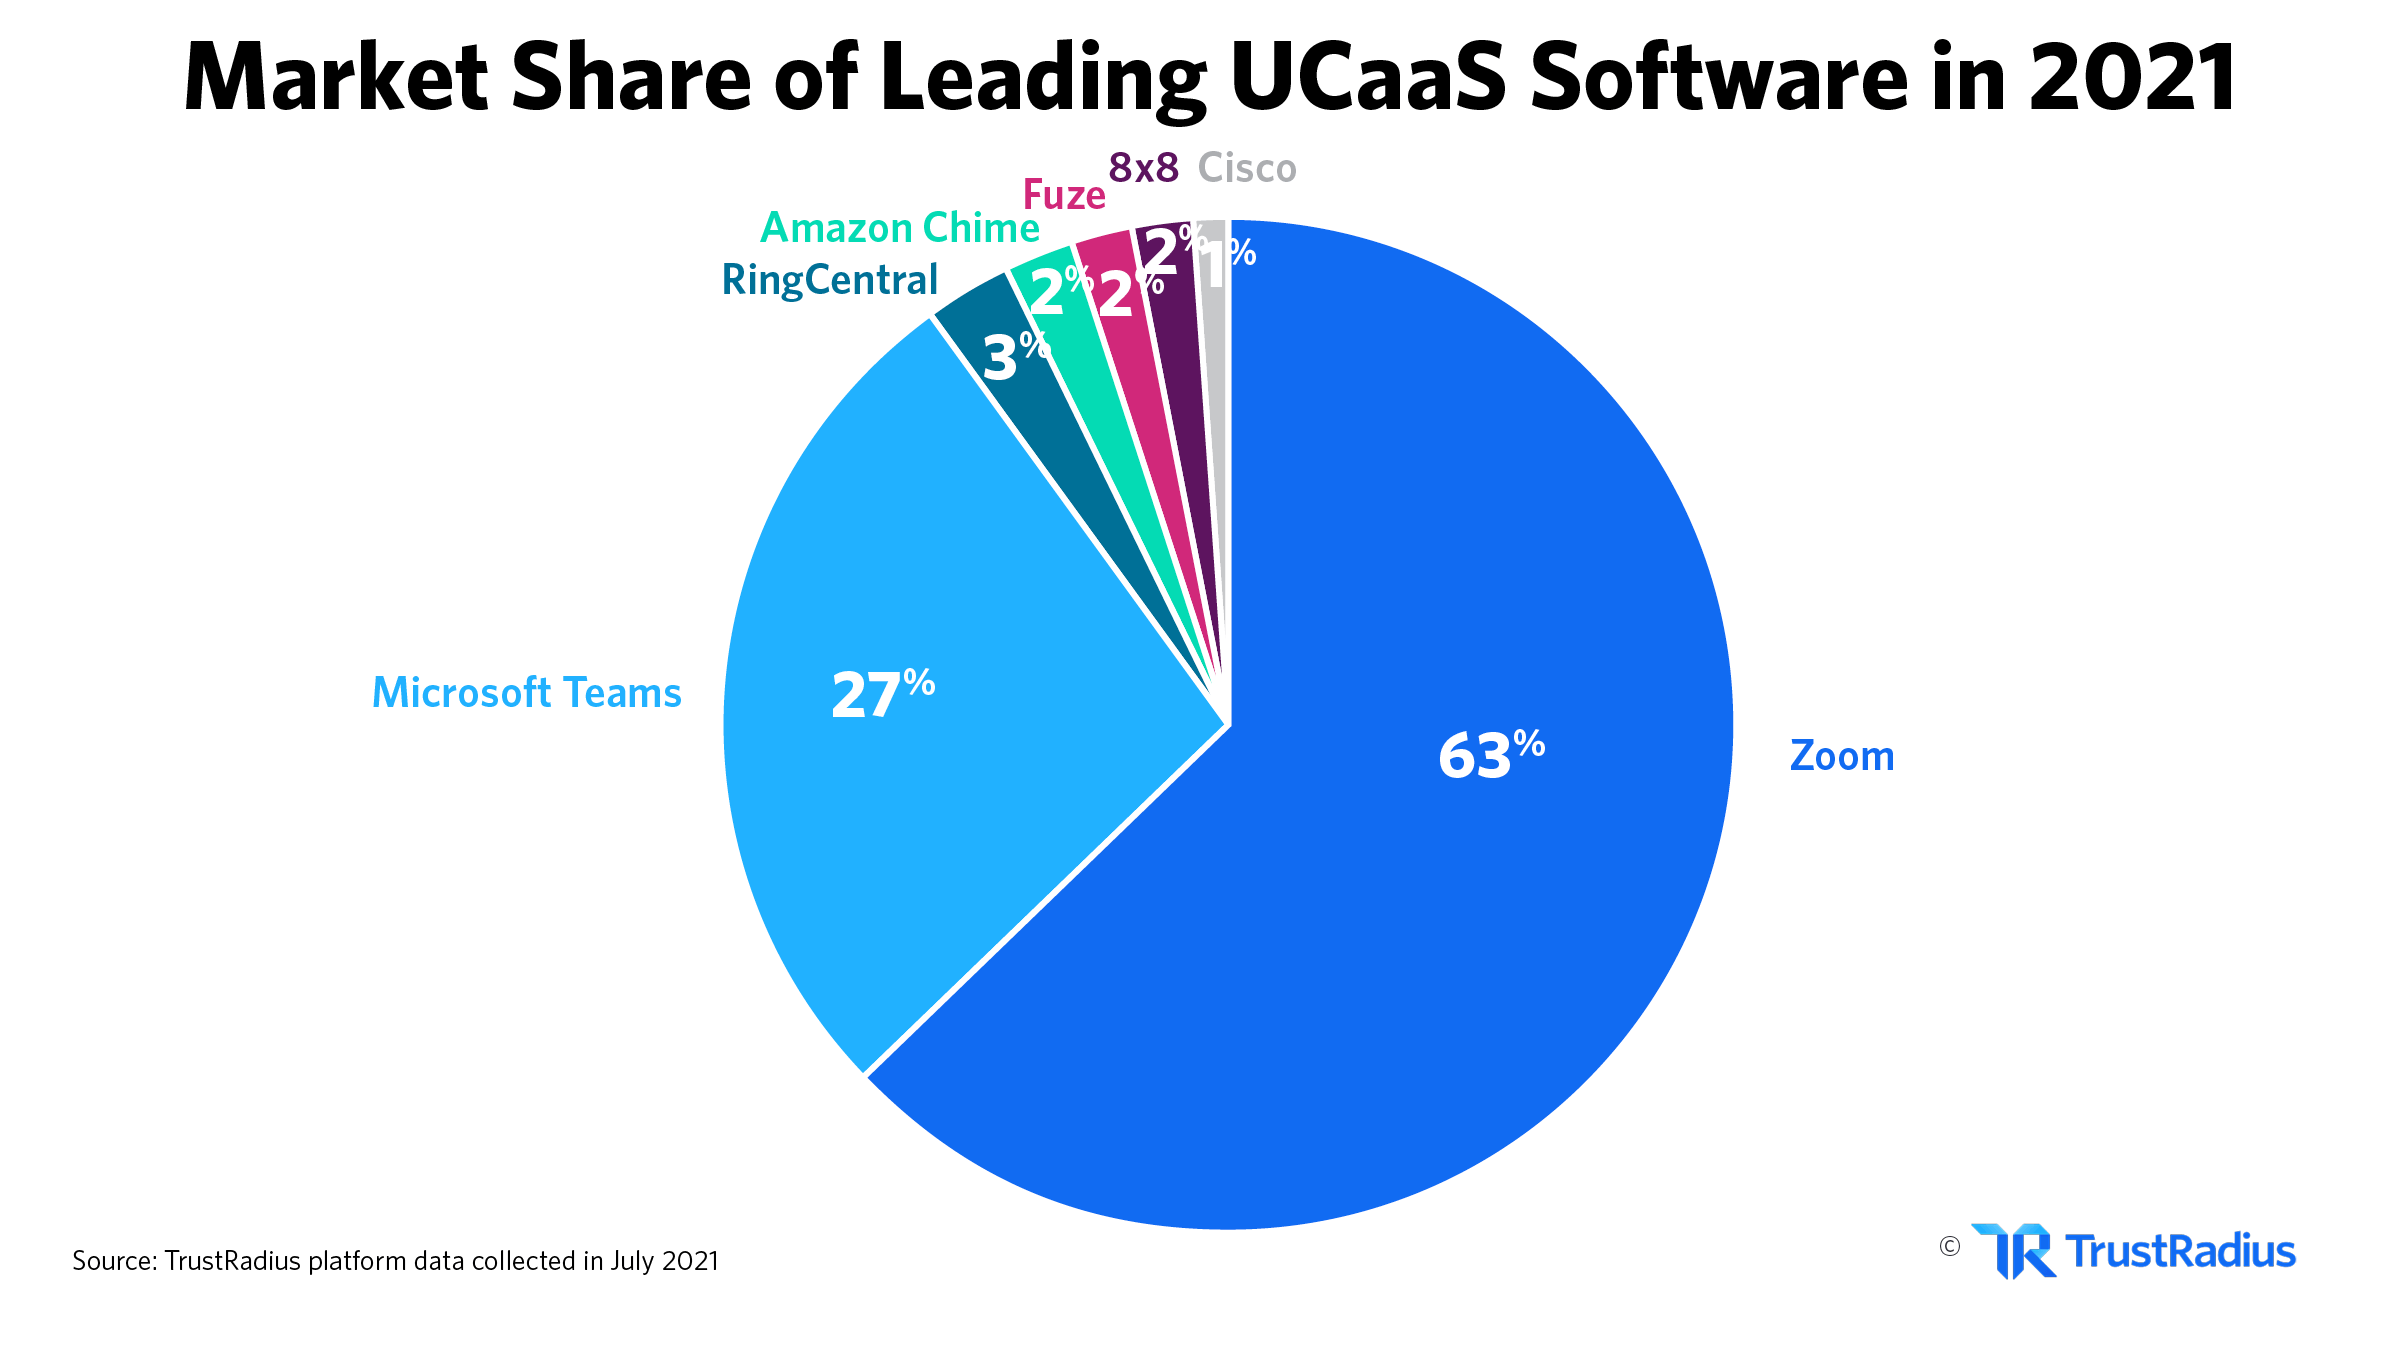 Market share of leading UCaaS software in 2021